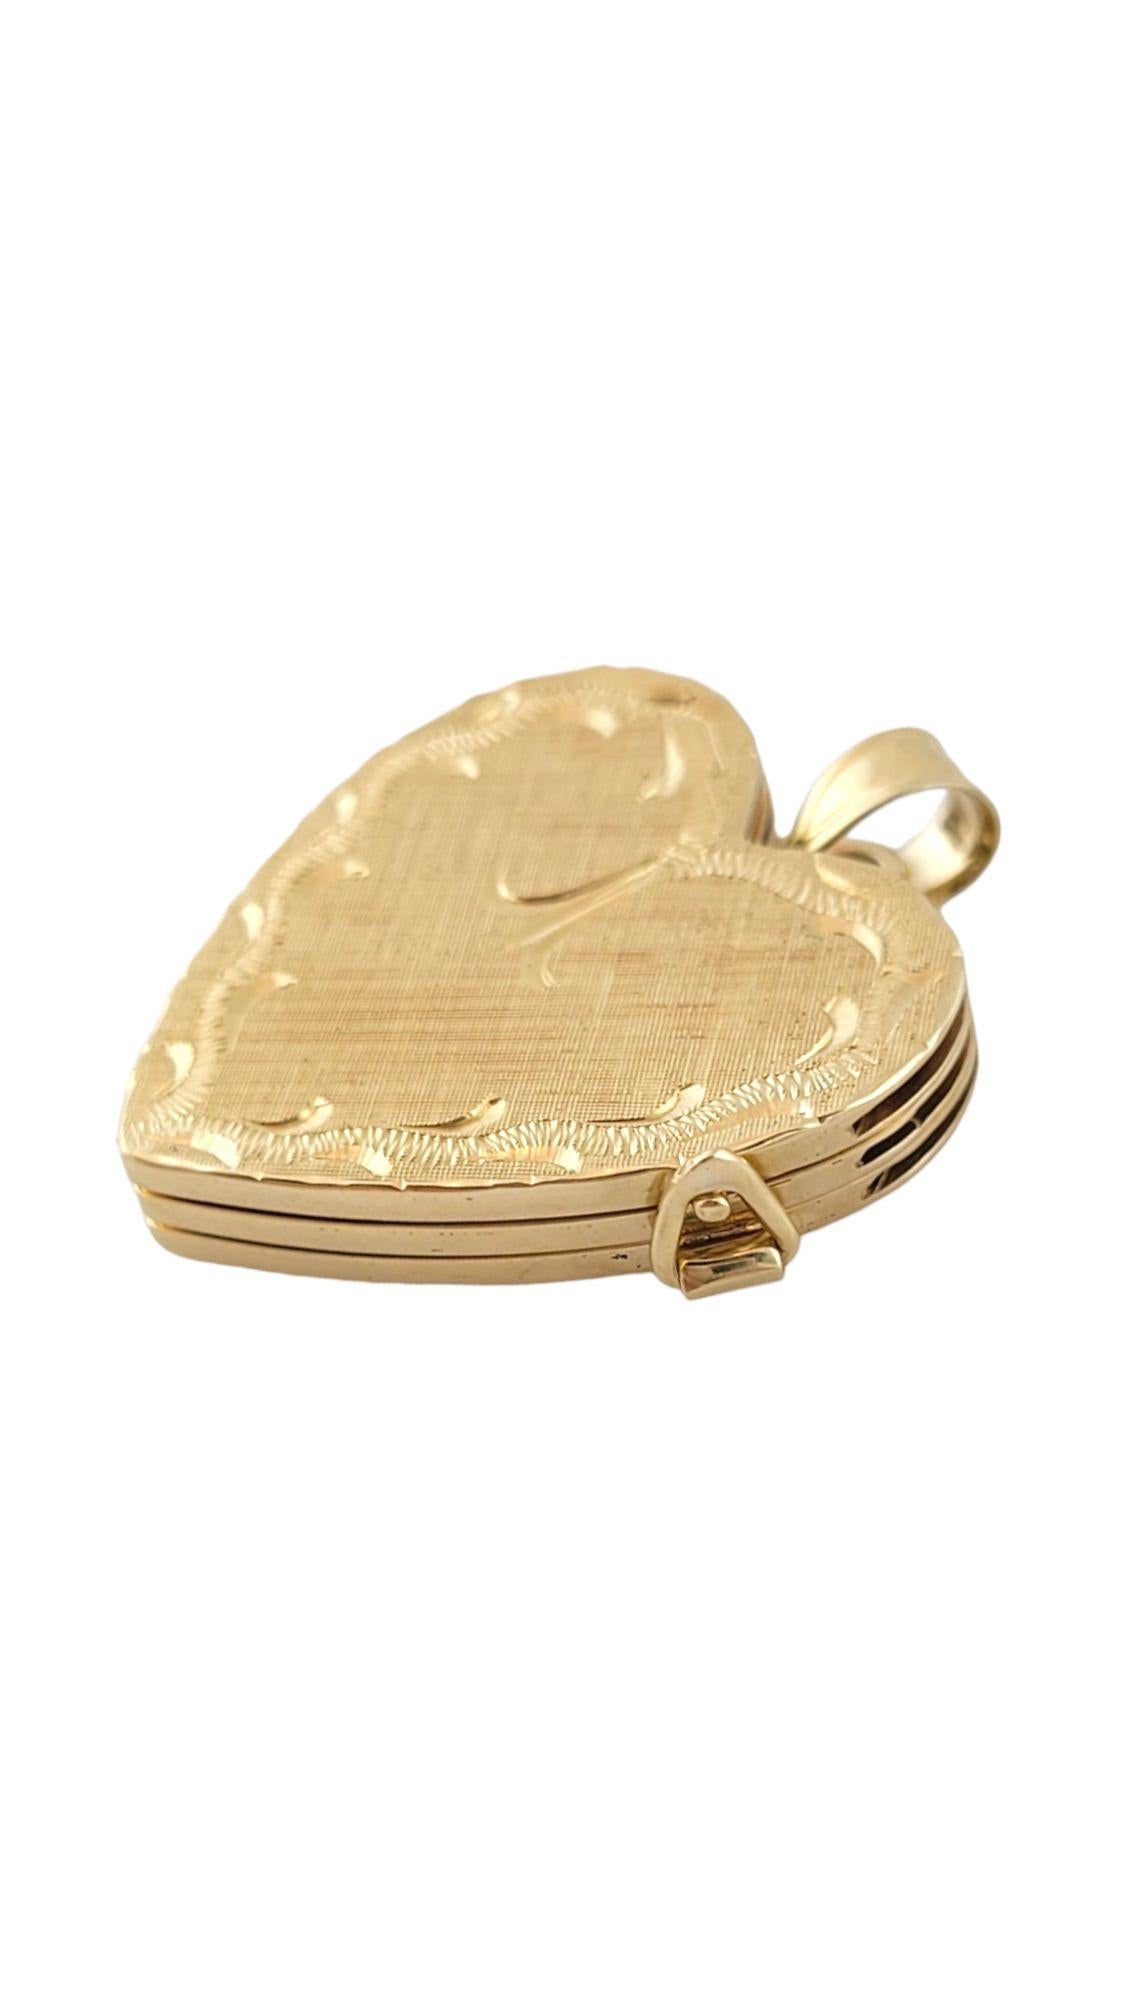 Vintage 14K Yellow Gold Multi Layer Heart Locket

This gorgeous 14K gold heart locket has 3 different layers to allow you to add more photos into your locket!

Size: 25.12mm X 25.98mm X 4.29

Length w/ bail: 30.9mm

Weight: 8.34 g/ 5.4